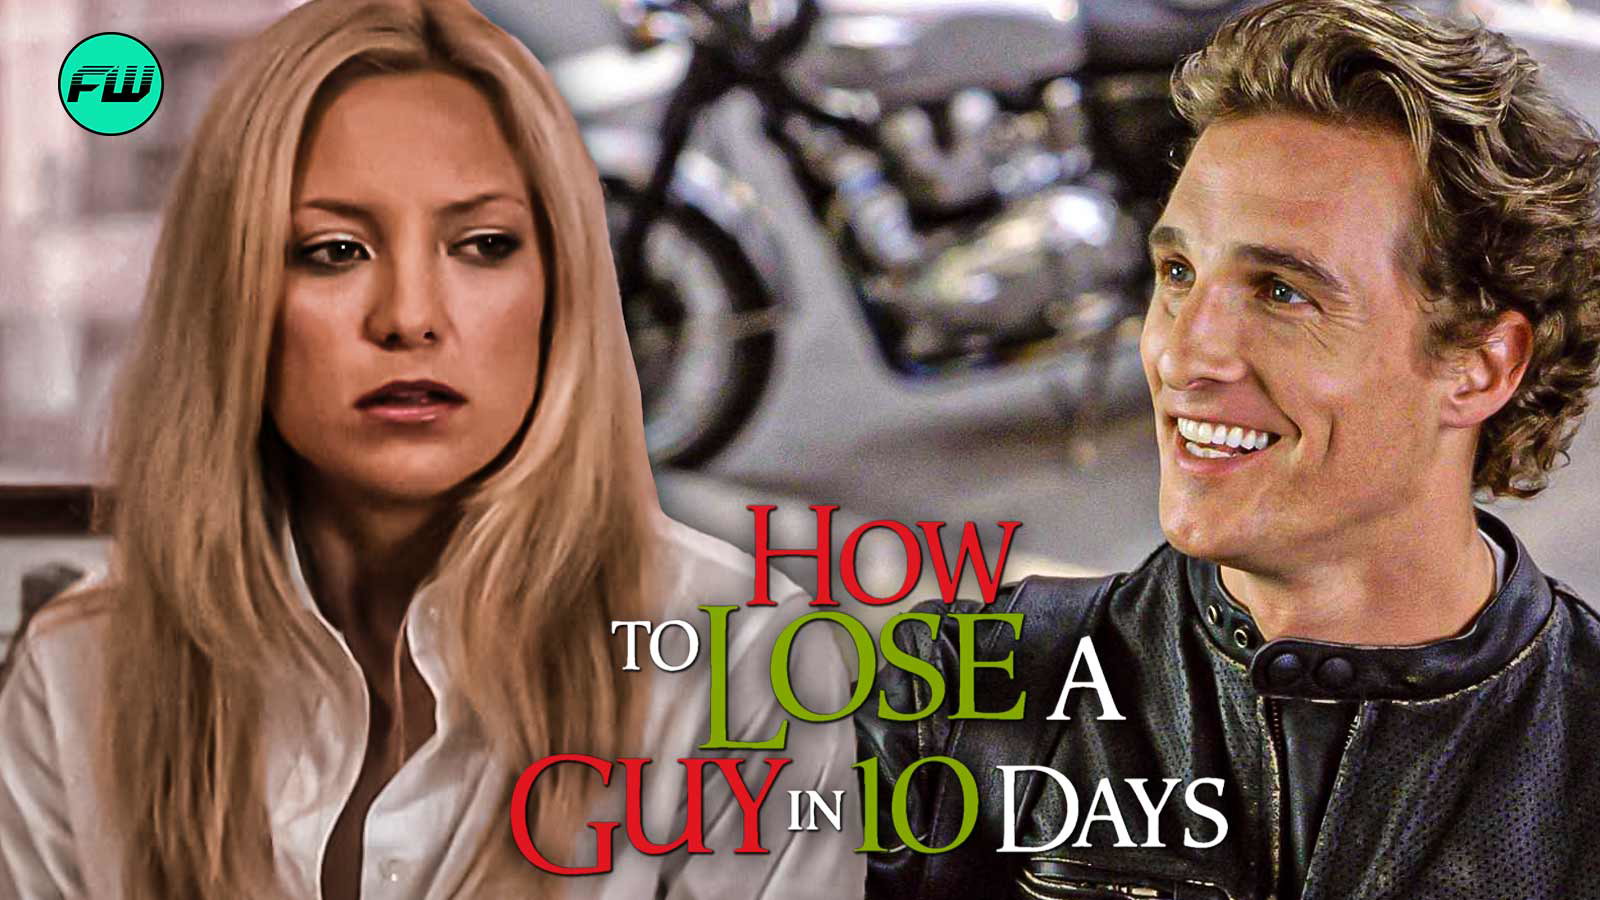 kate hudson, how to lose a guy in 10 days, matthew mcconaughey